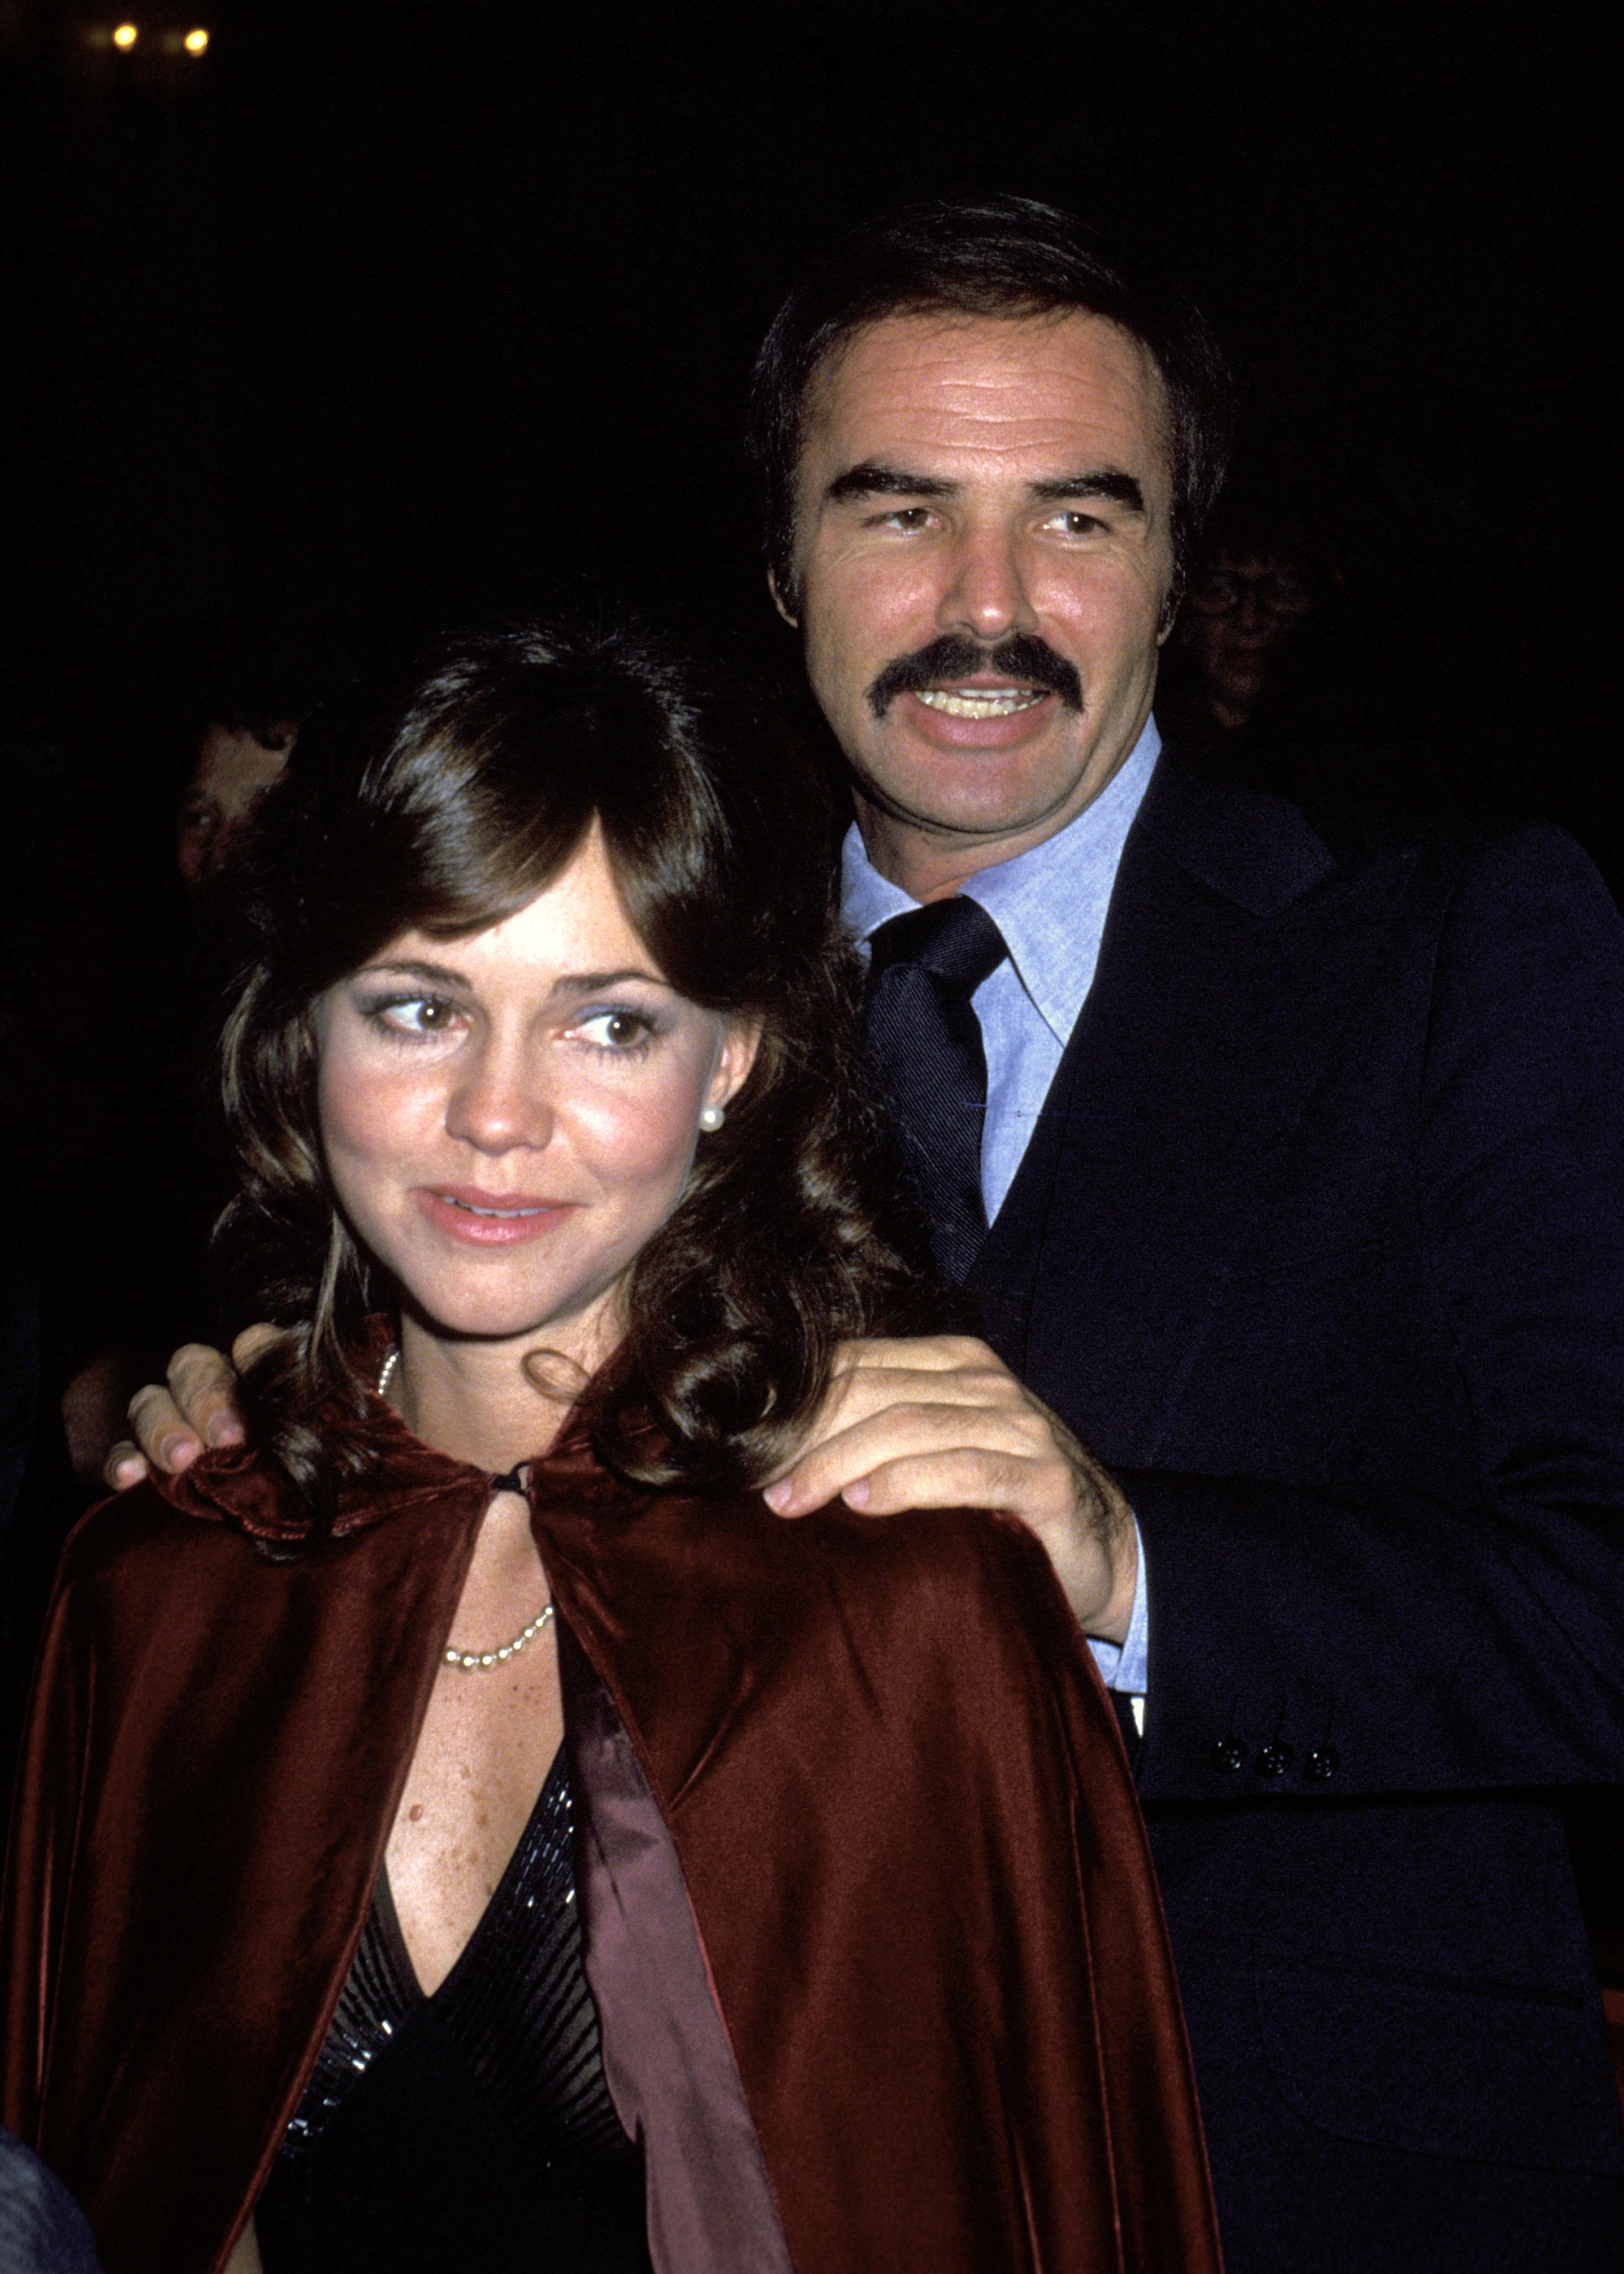 Sally Field and Burt Reynolds attend "Golda" gala on November 5, 1977 ┃Source: Getty Images